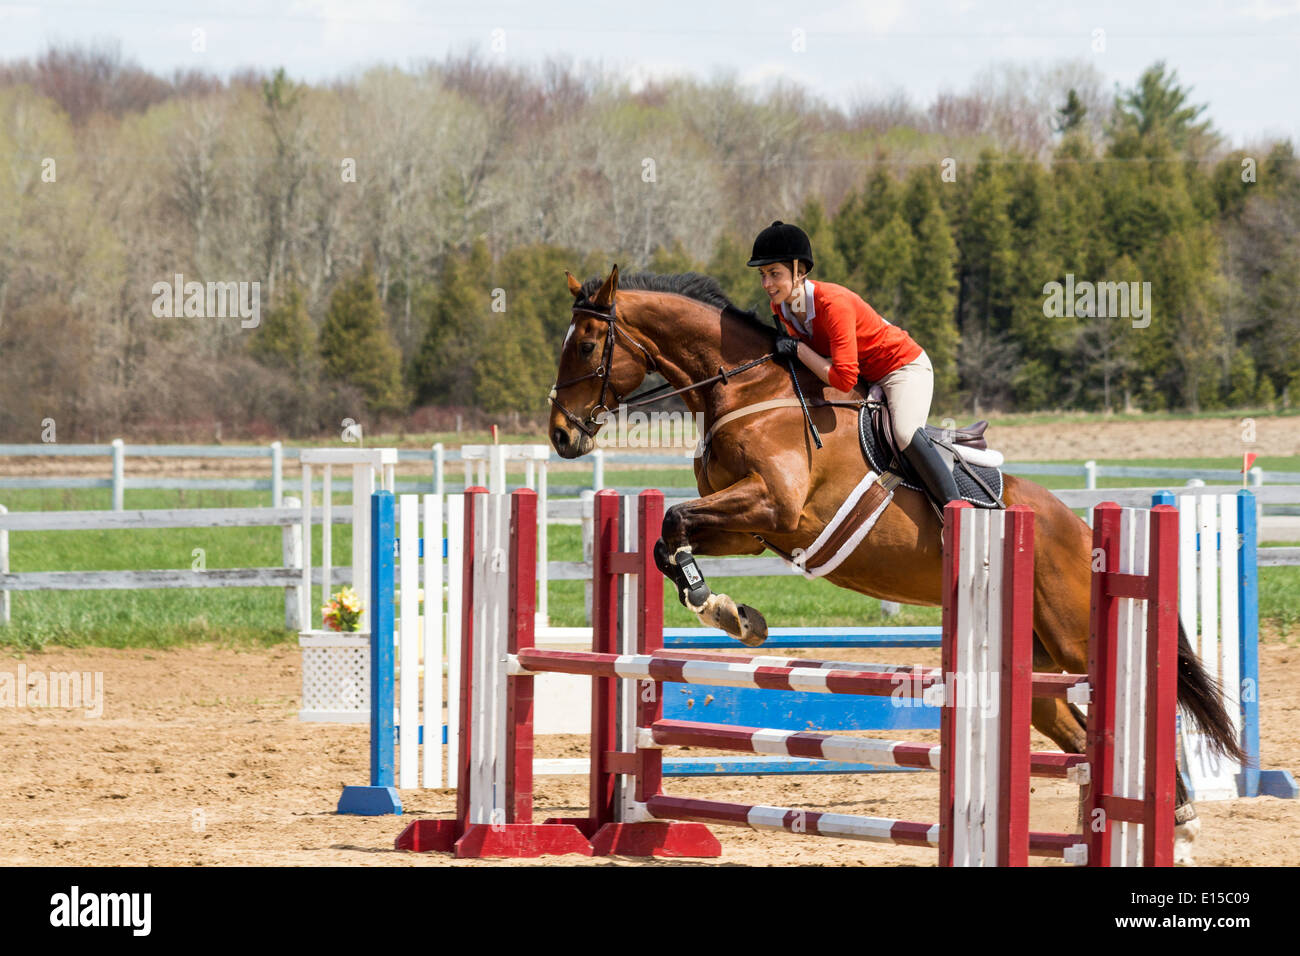 Bay horse with woman rider clearing an oxer at a local horse schooling show. Stock Photo